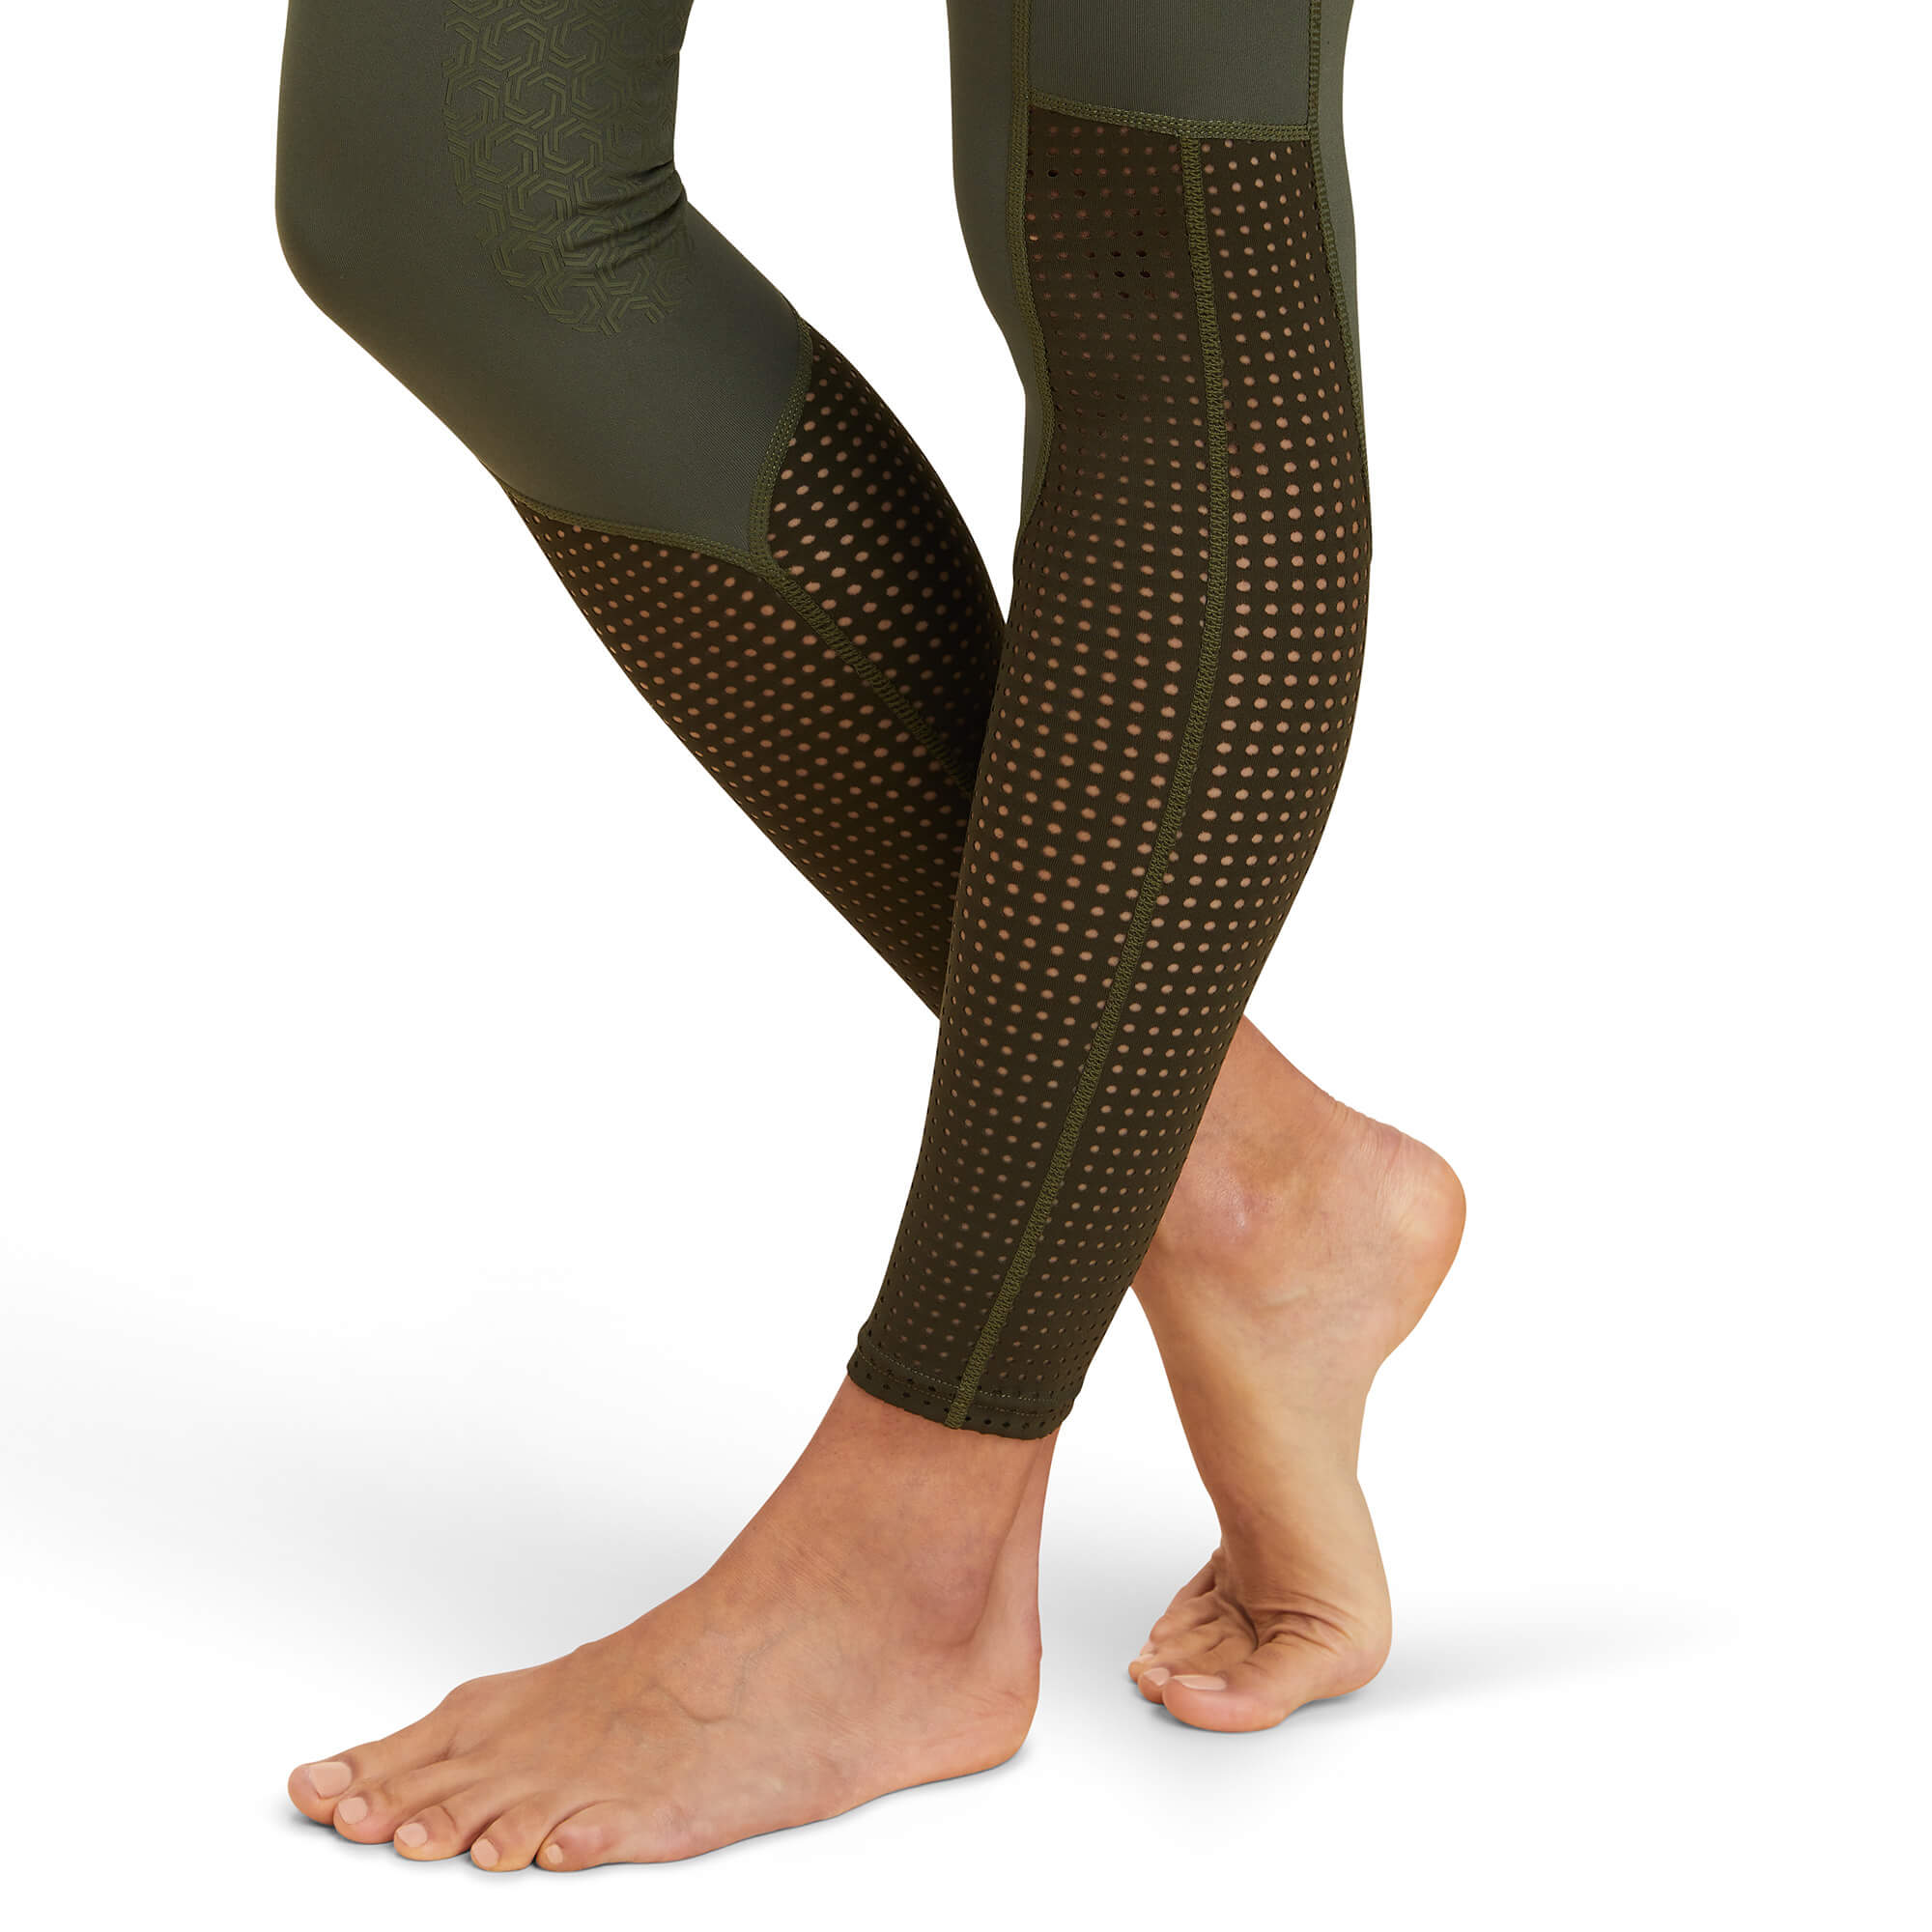 ARIAT CLOTHING Ariat Womens Riding Tights